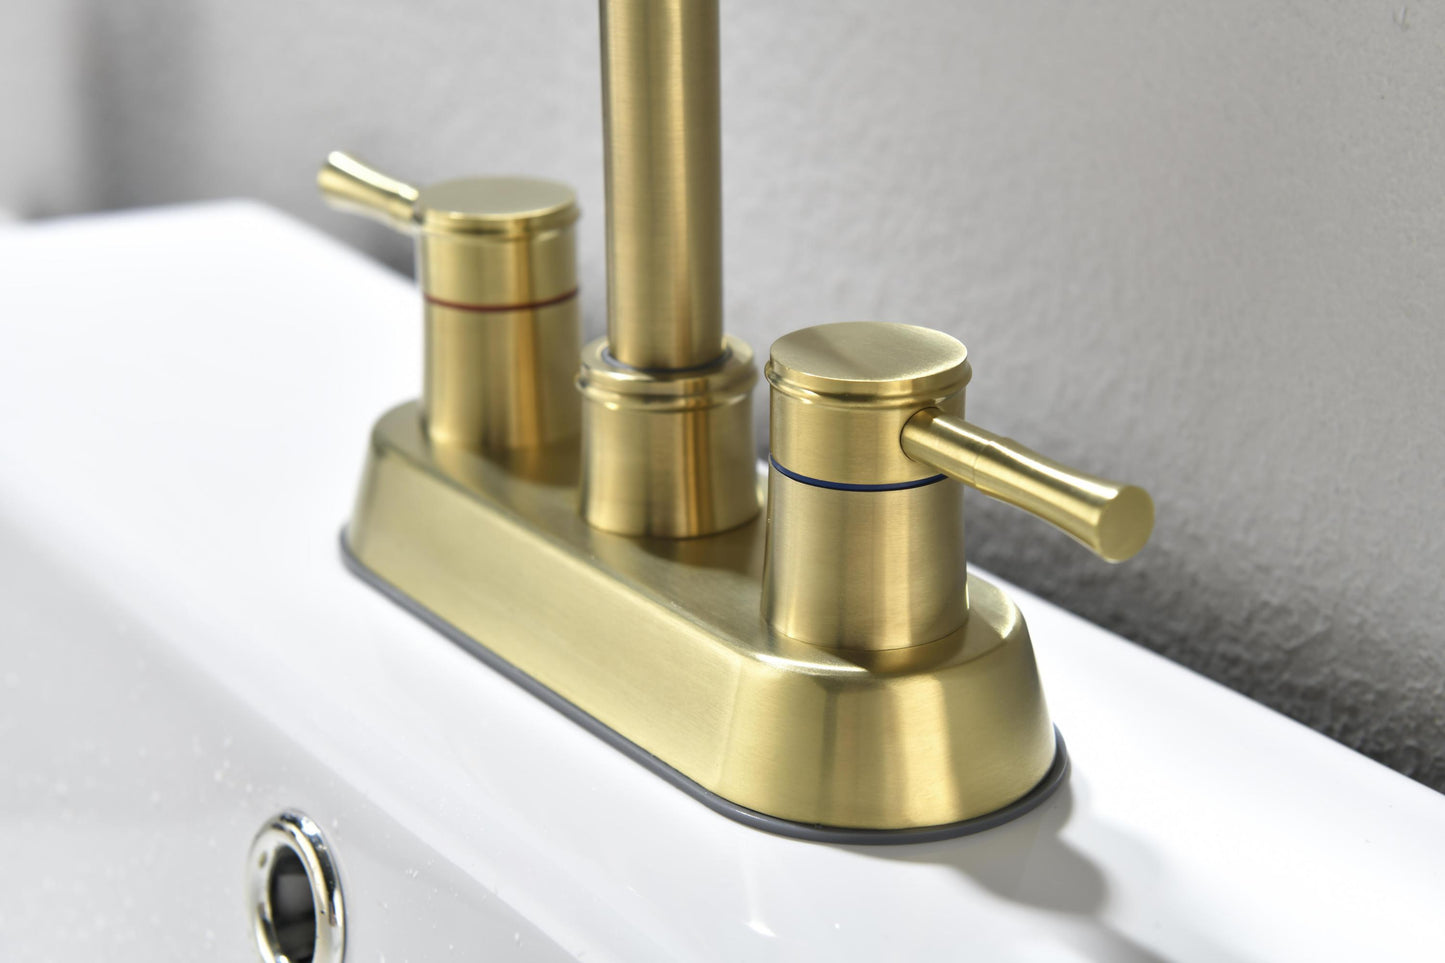 Gold 4 Inch Lead-Free Bathroom Faucet with Dual Handle Switch